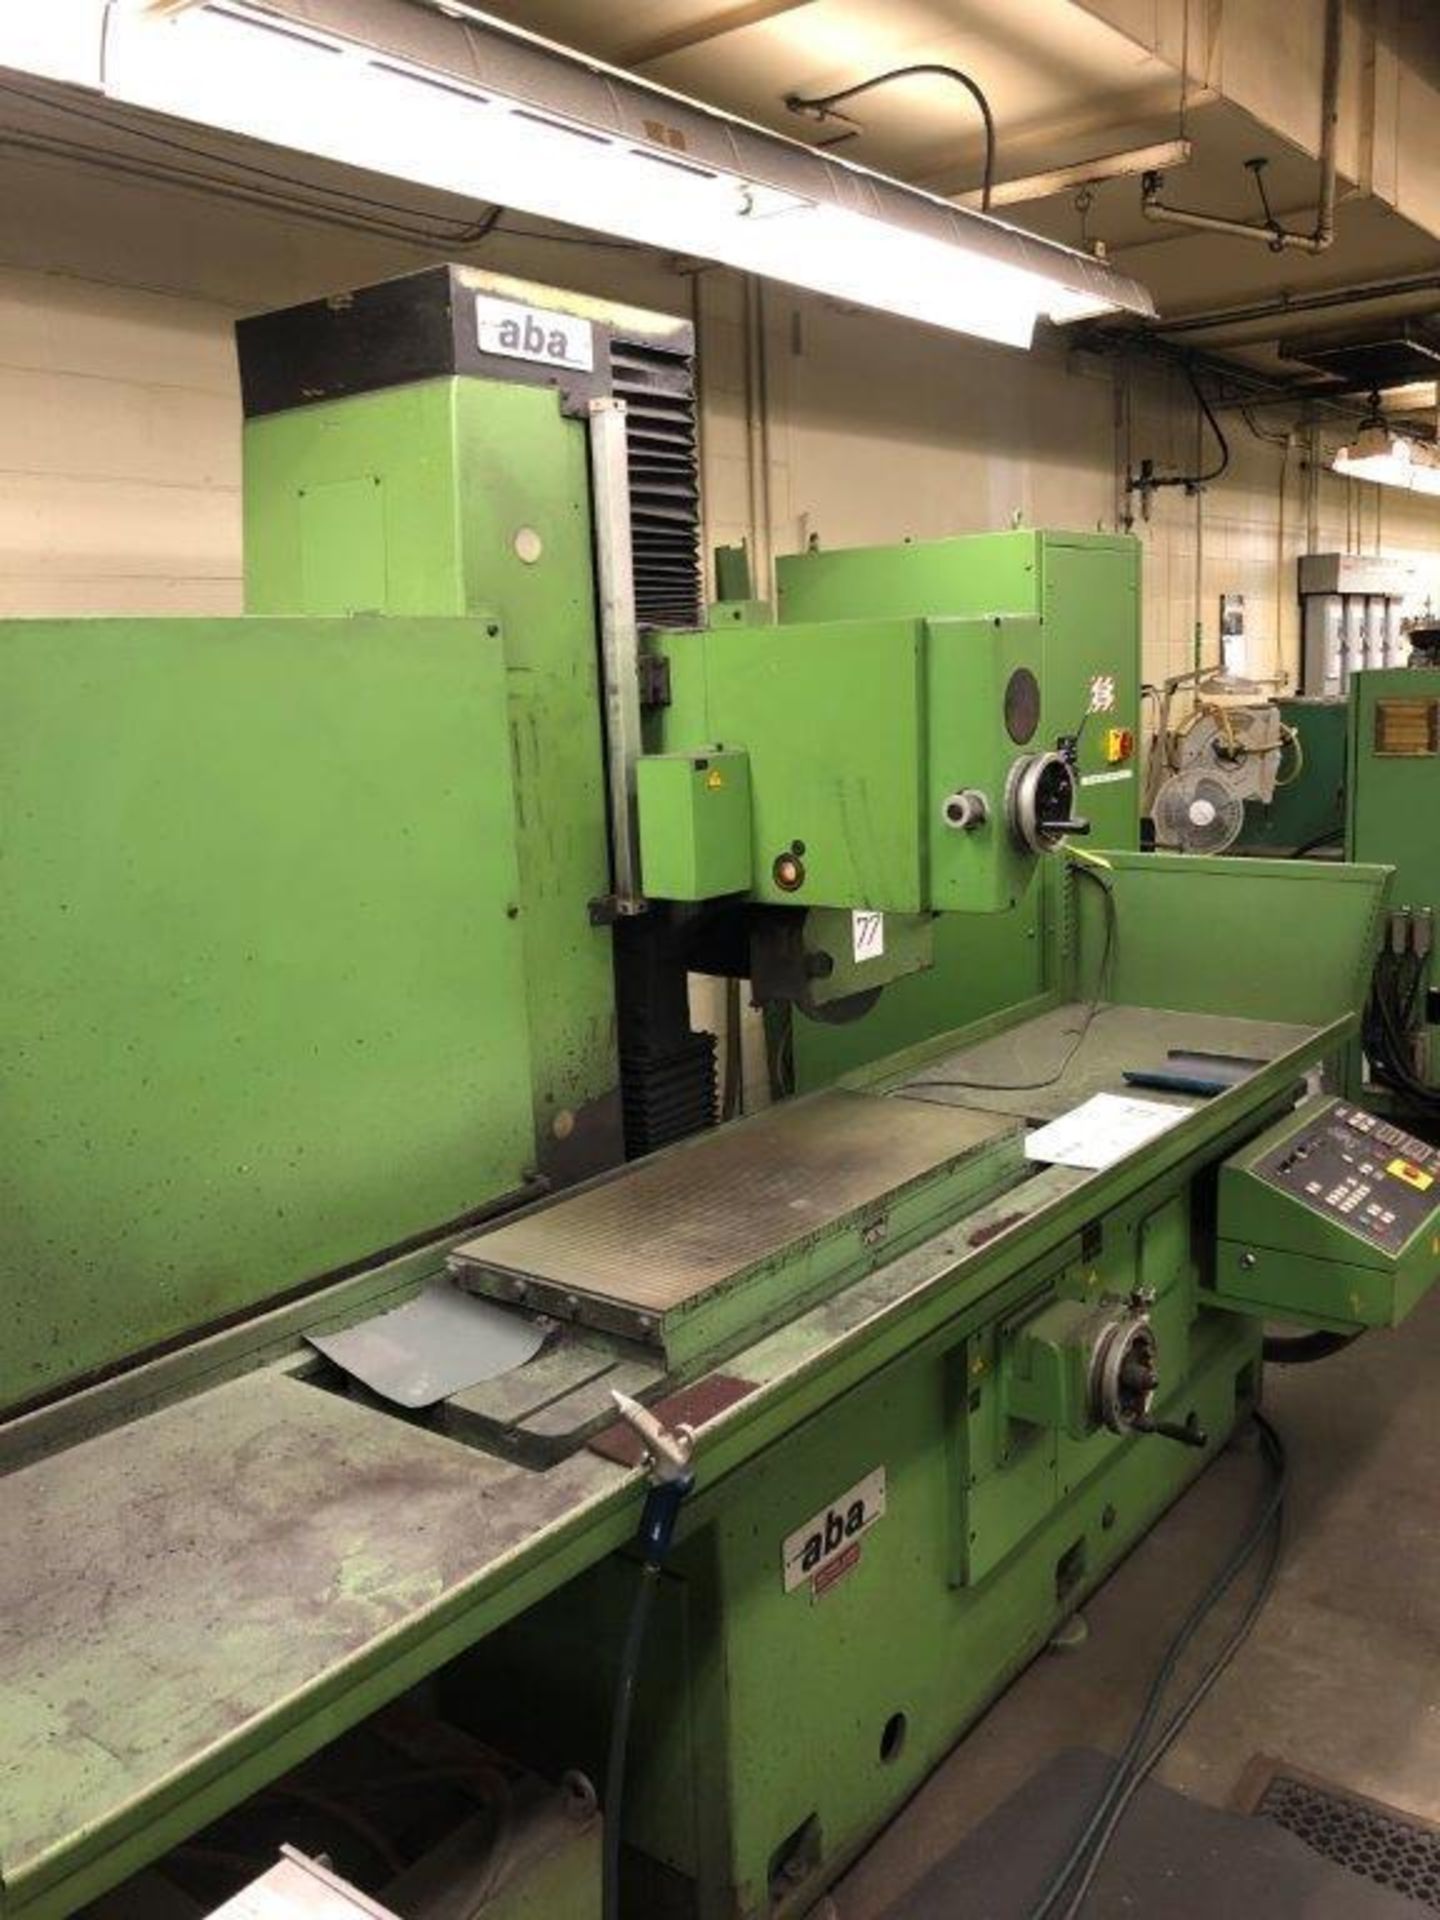 Aba FFU 1000/50 Surface Grinder, S/N 207990 (New 1986), 15.75" x 39" Electro-Magnetic Chuck - Image 4 of 10